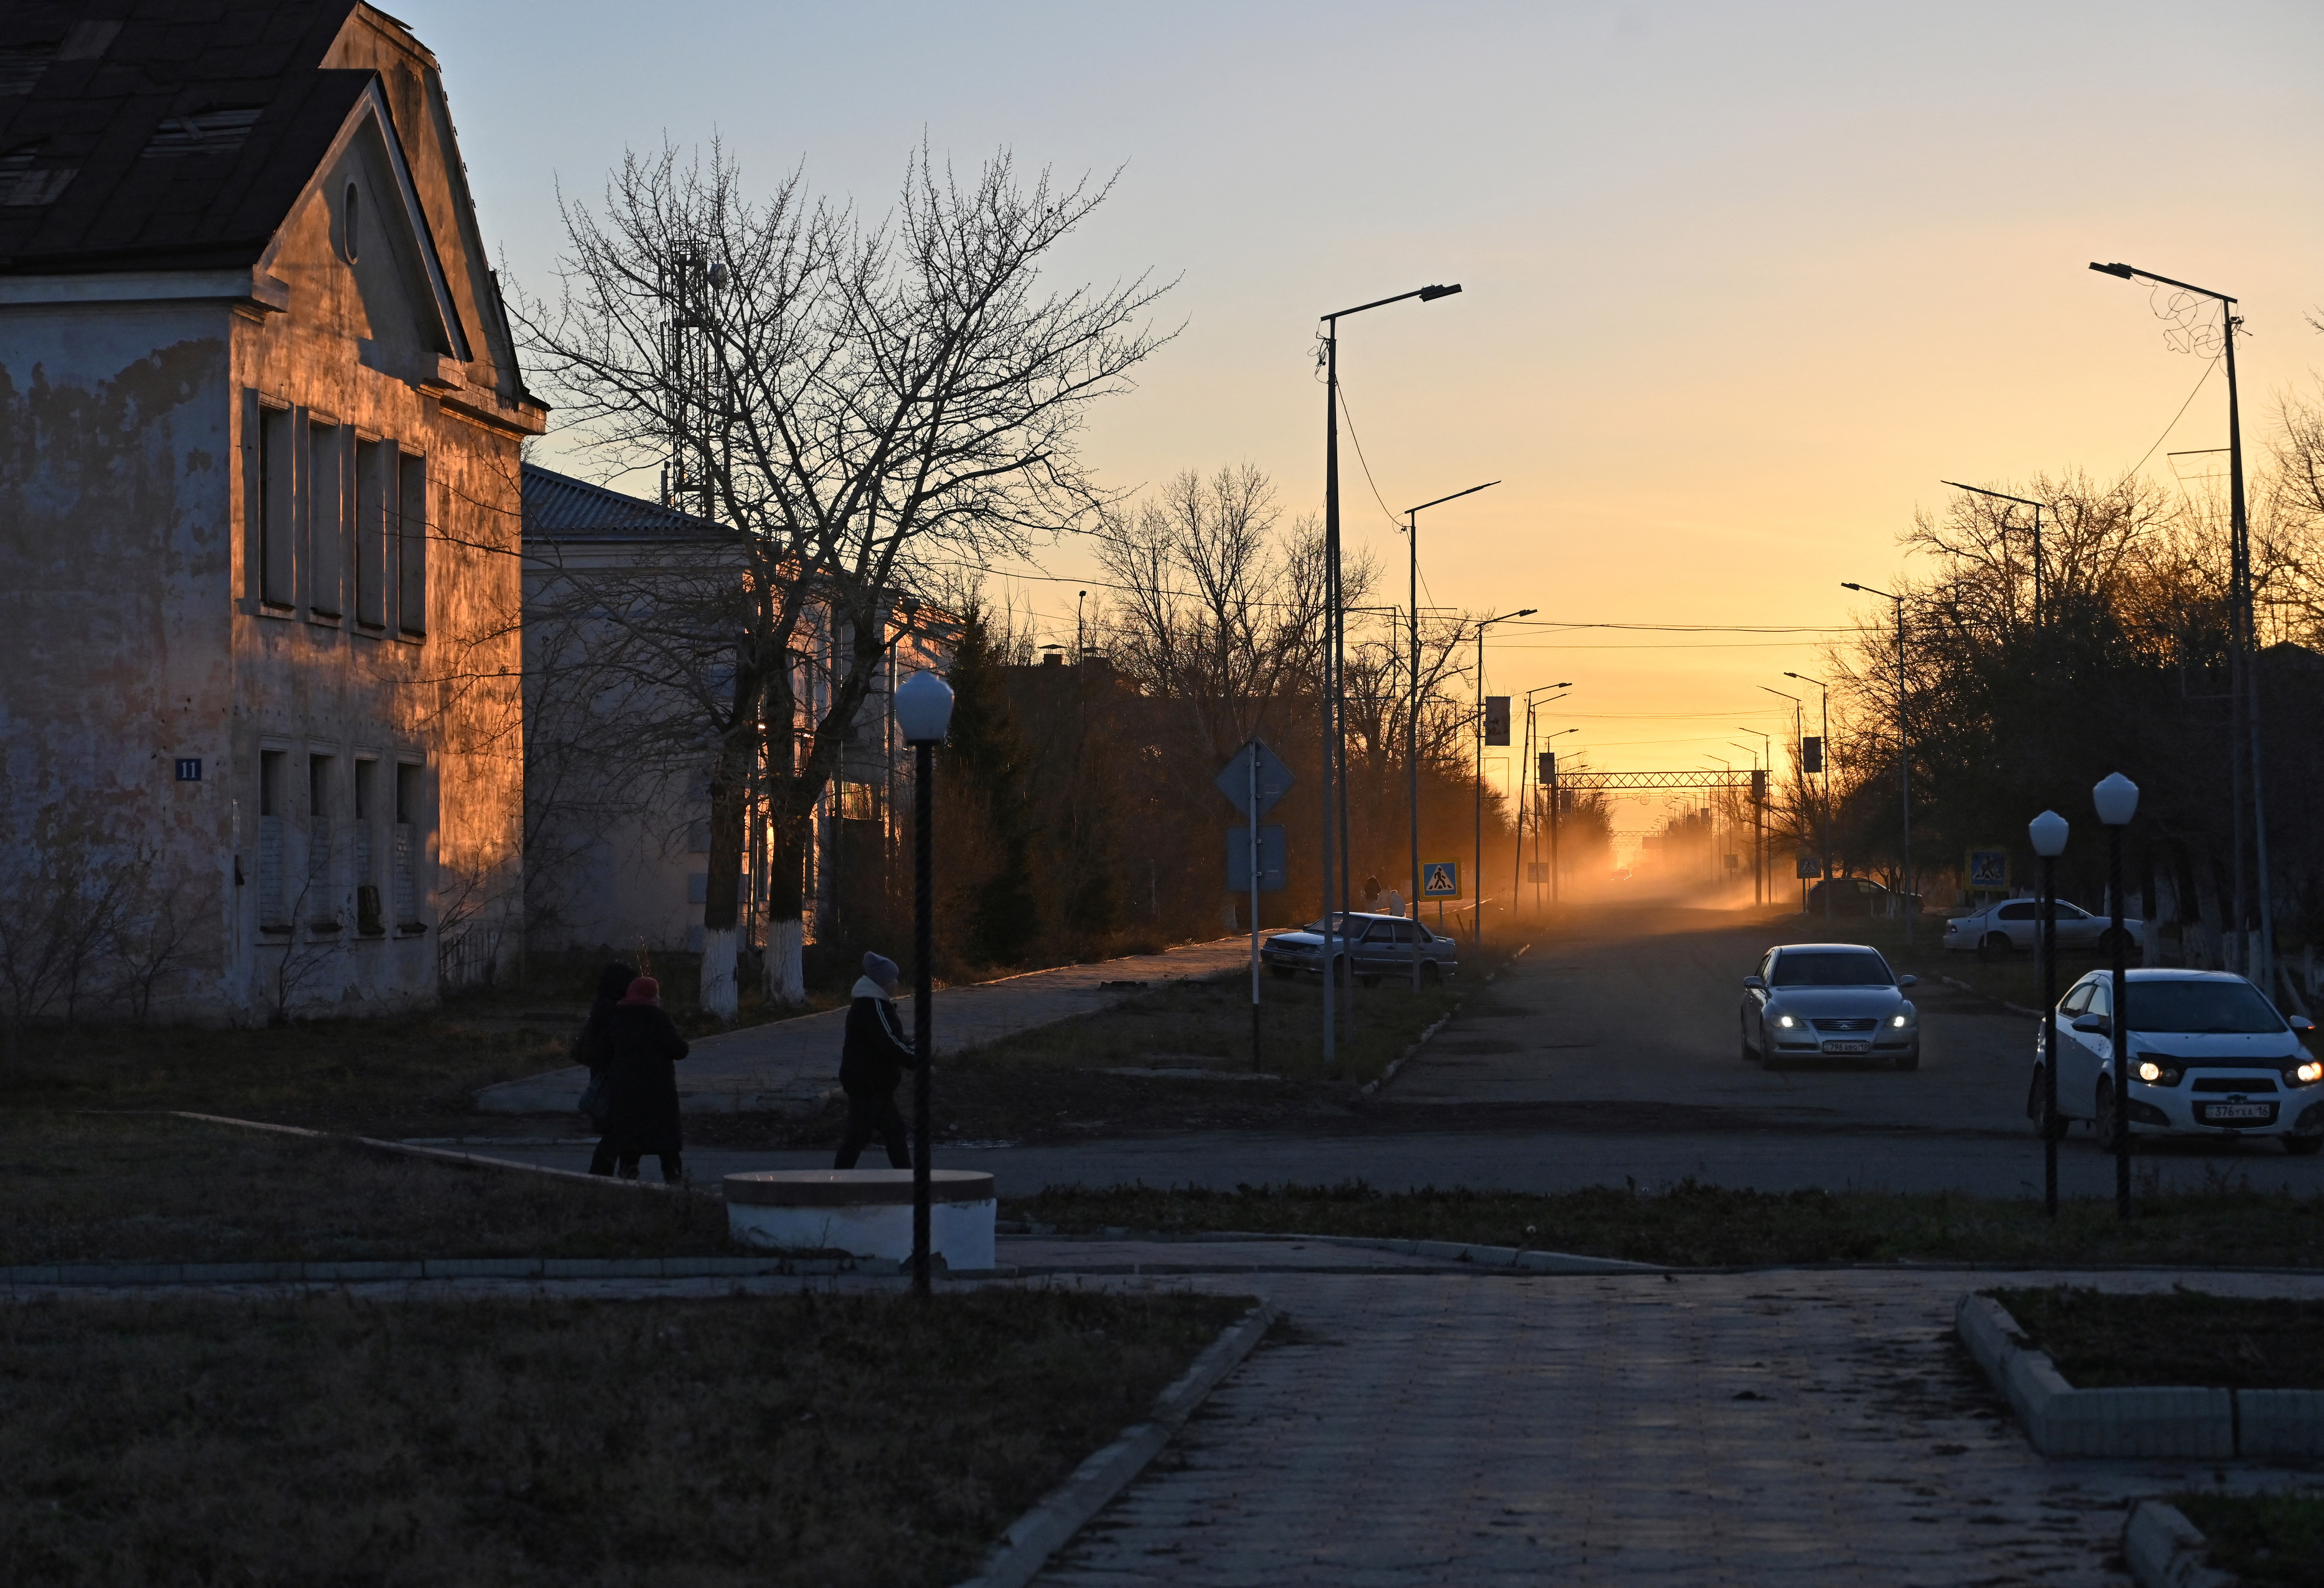 People walk along a street during sunset in Kurchatov